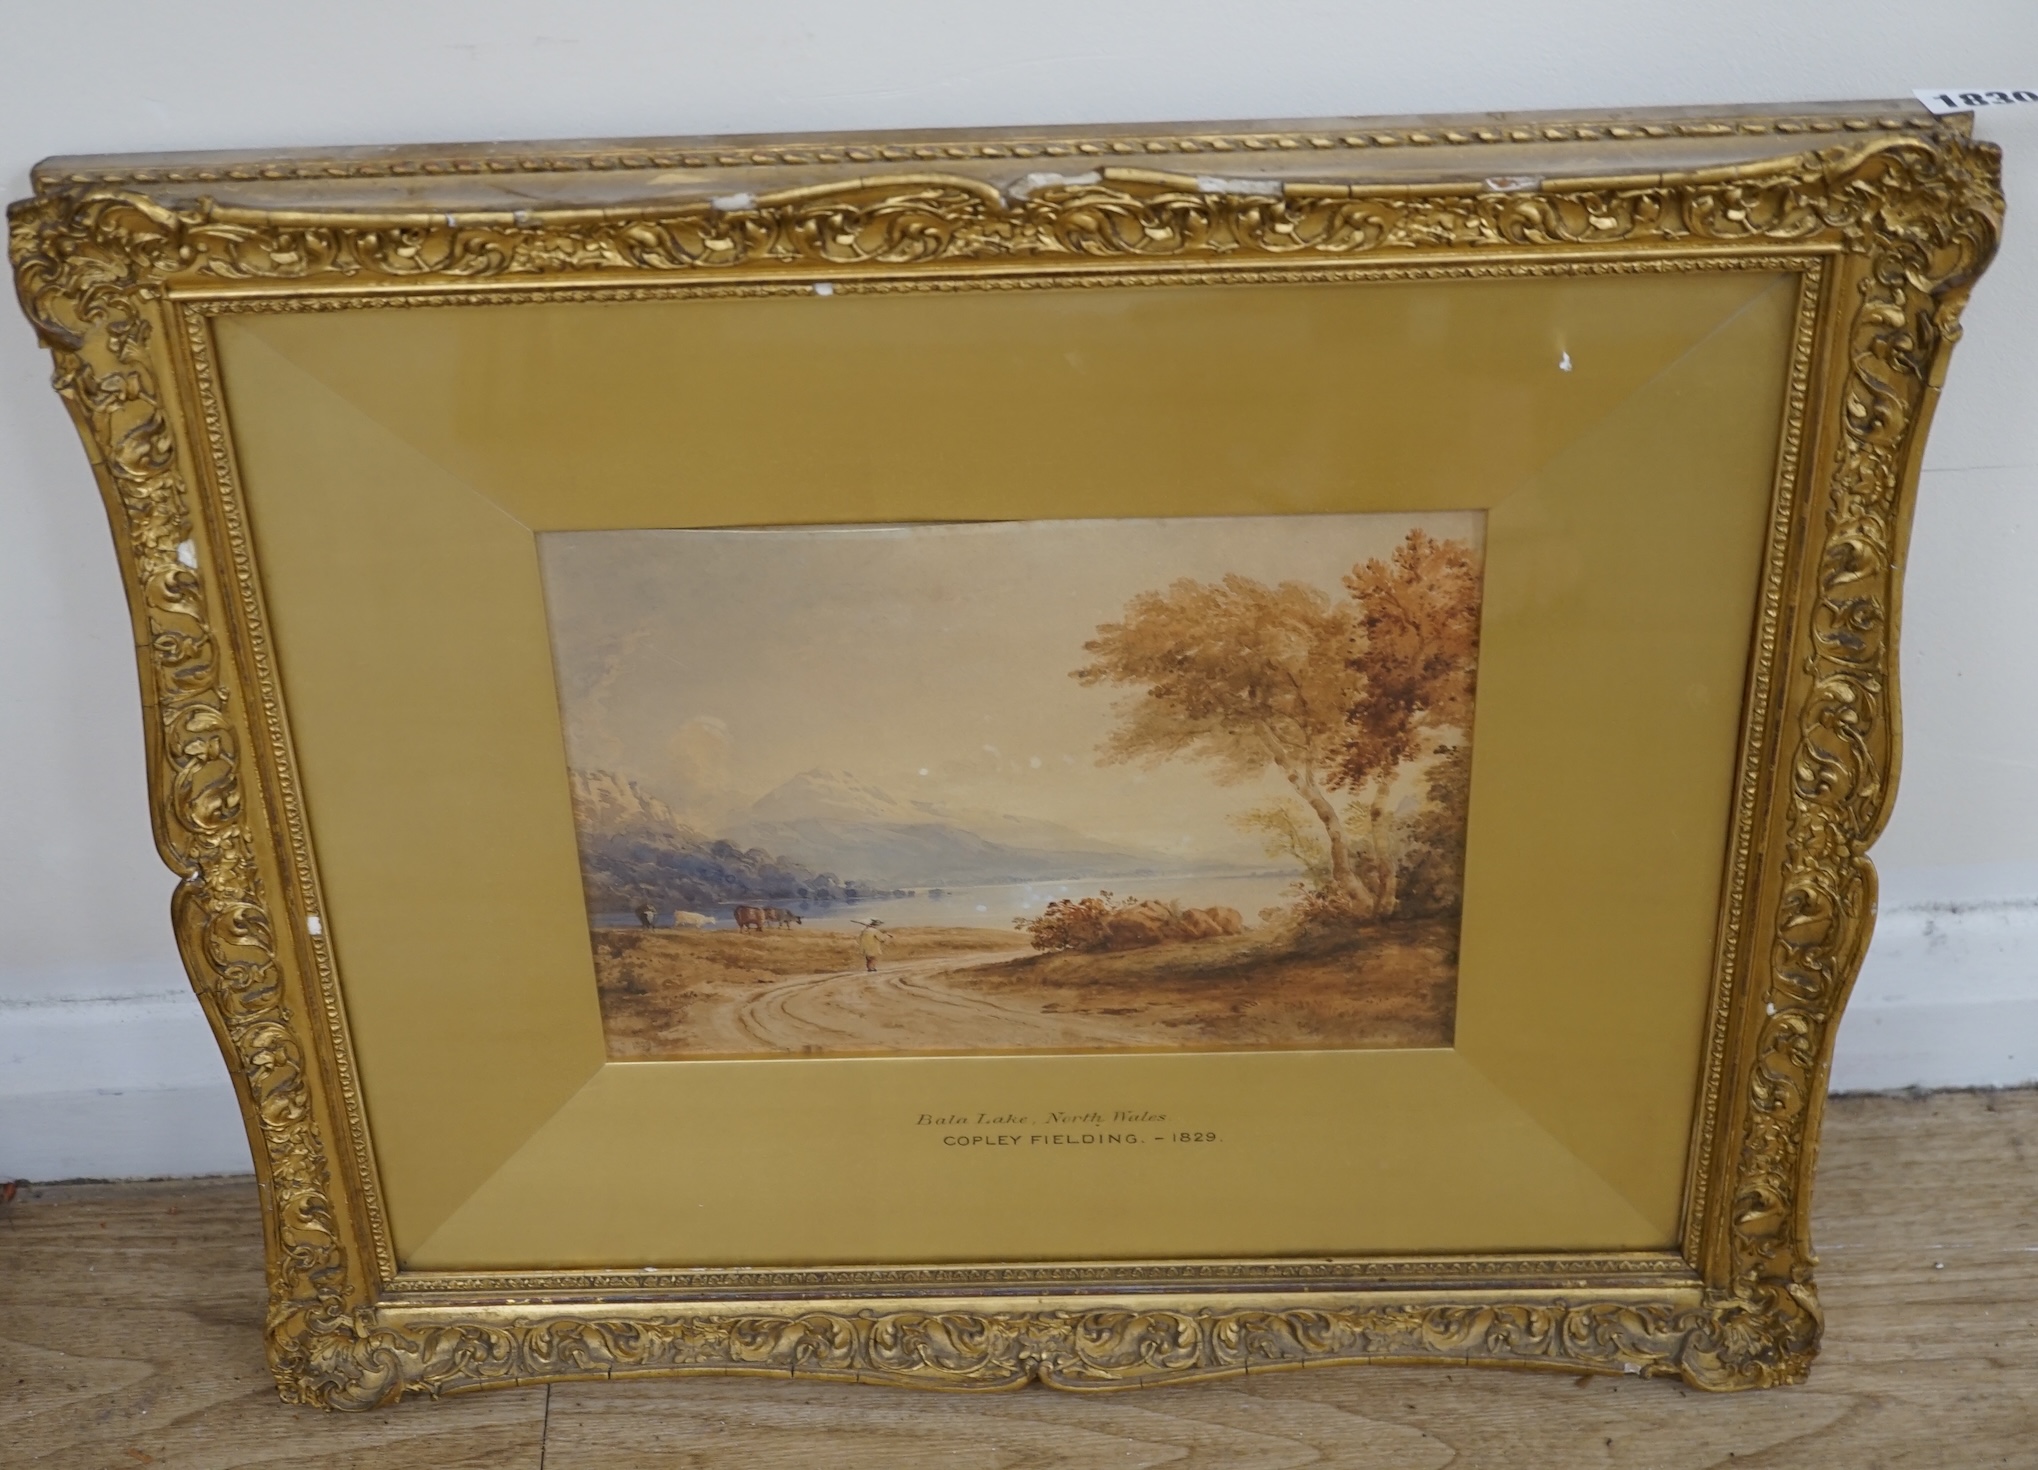 Circle of Copley Fielding (1787-1855), watercolour, Bala lake, North Wales with shepherd, cattle and mountains beyond, stencil verso, 17 x 25cm, gilt framed. Condition - fair, faded